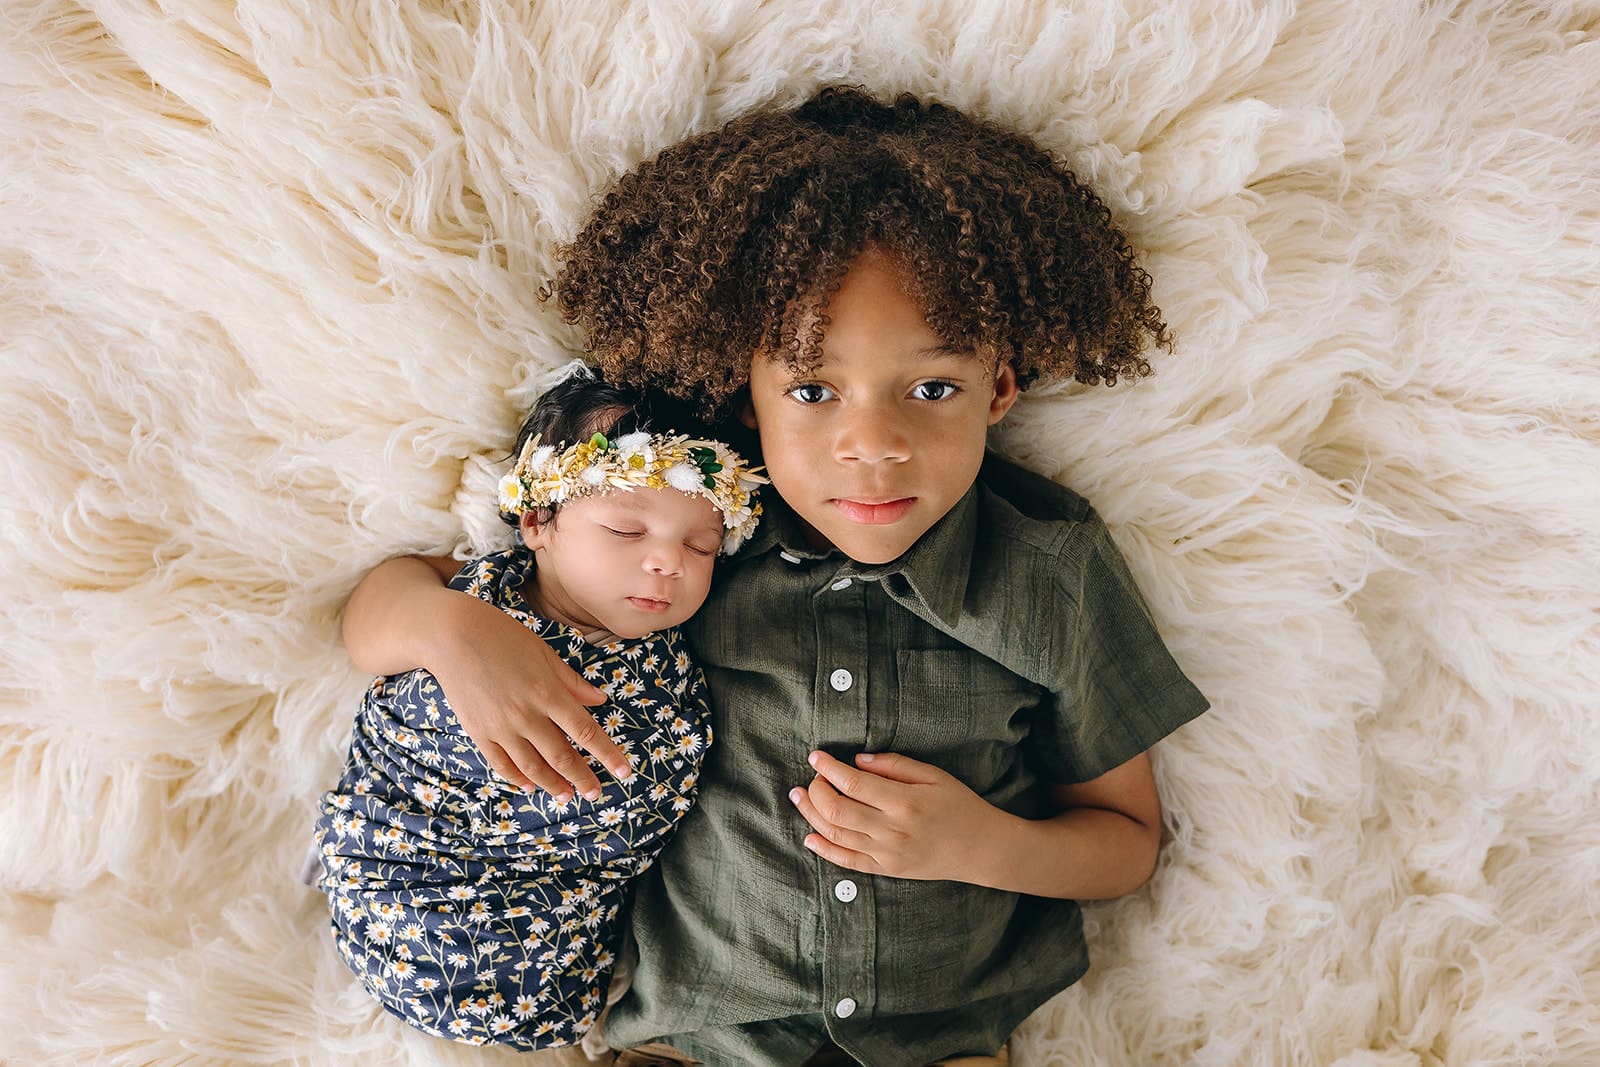 An adorable top-down view of two siblings lying on a fluffy white rug. The newborn, wrapped in a navy floral swaddle and wearing a delicate floral headband, sleeps peacefully. Next to the baby is the older sibling, a curly-haired child wearing a buttoned olive-green shirt, gazing at the camera with an expression of pride and happiness.